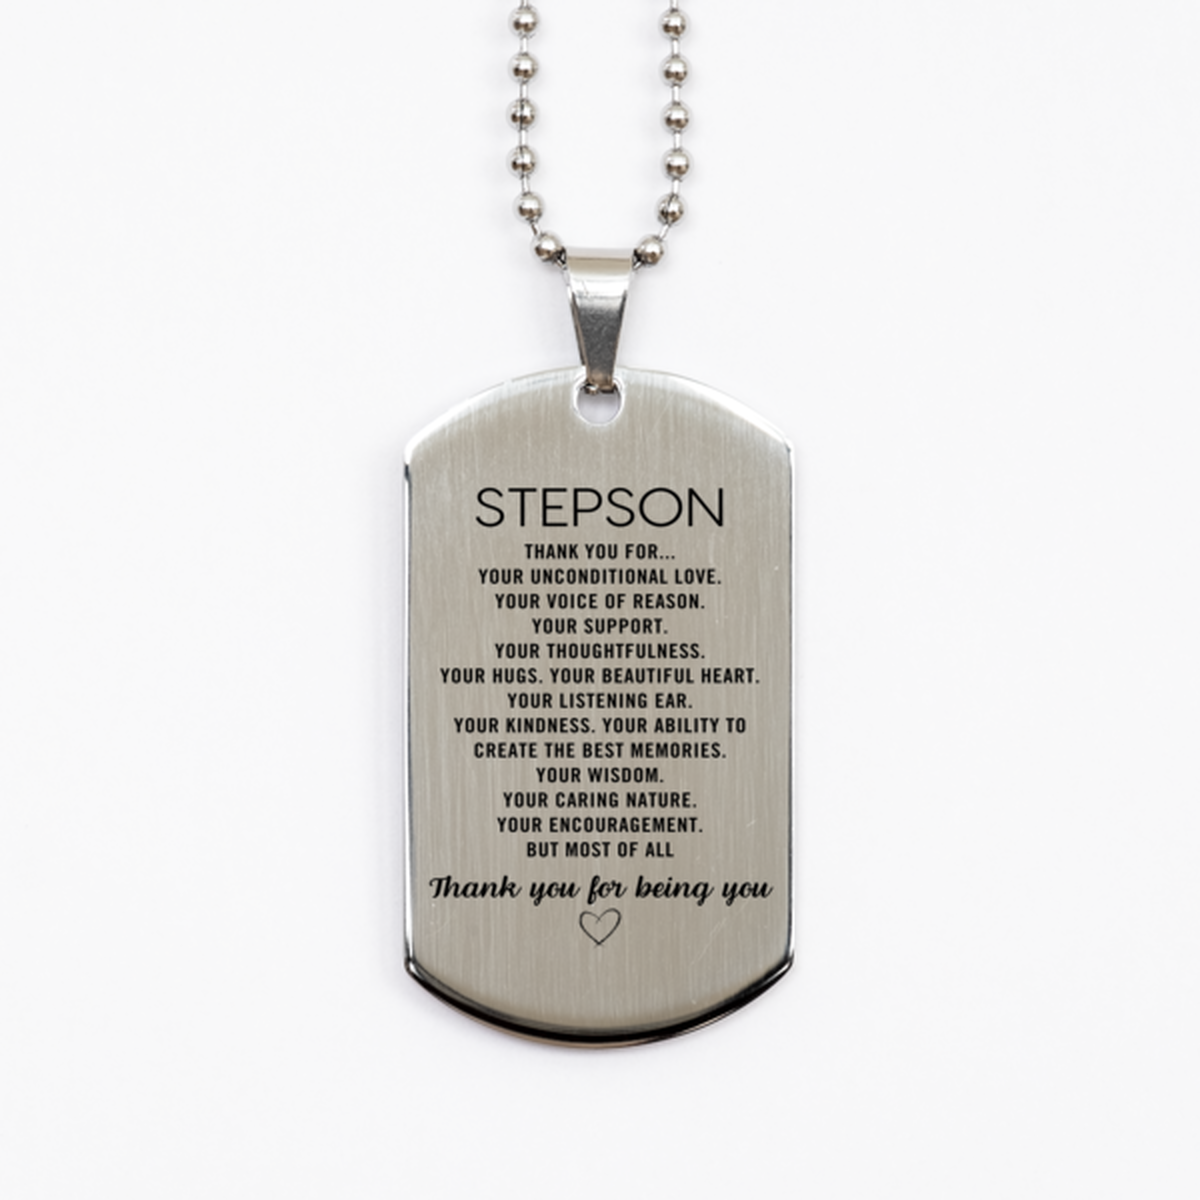 Stepson Silver Dog Tag Custom, Engraved Gifts For Stepson Christmas Graduation Birthday Gifts for Men Women Stepson Thank you for Your unconditional love